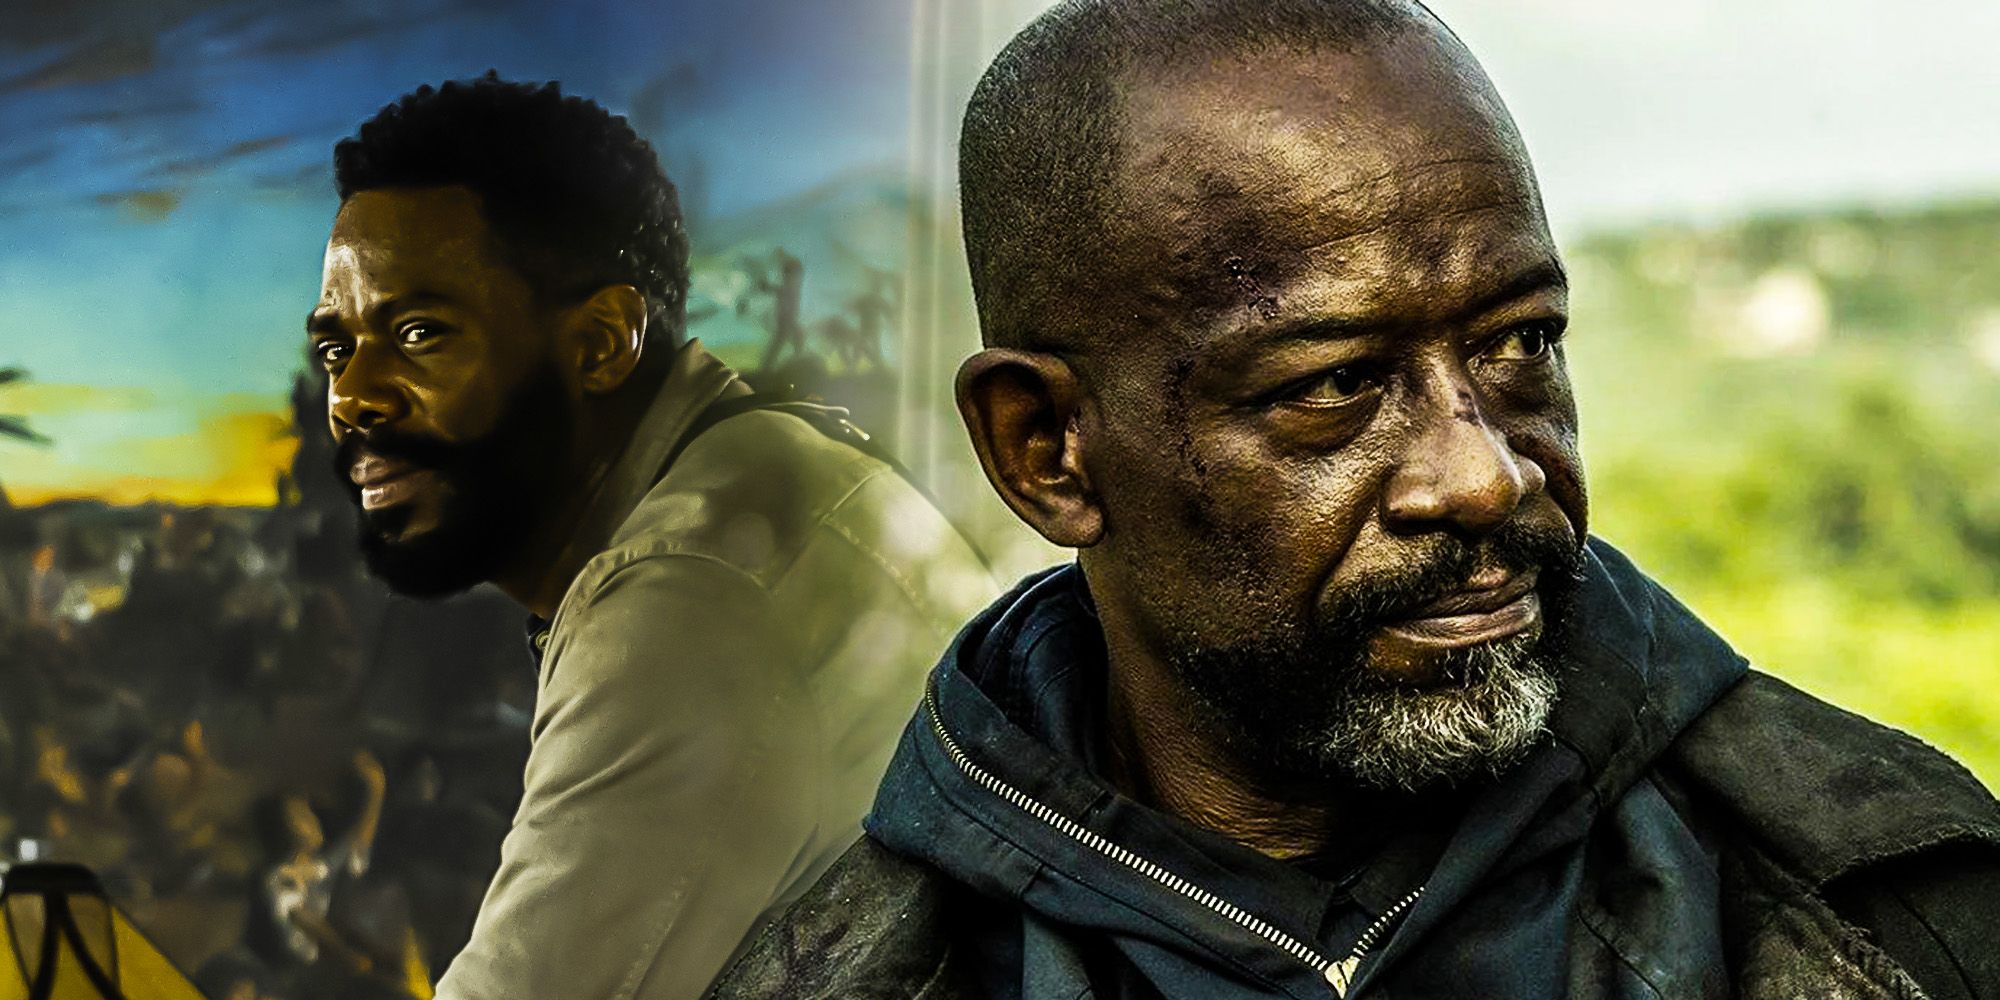 Fear the walking dead strand vs morgan both sides are wrong